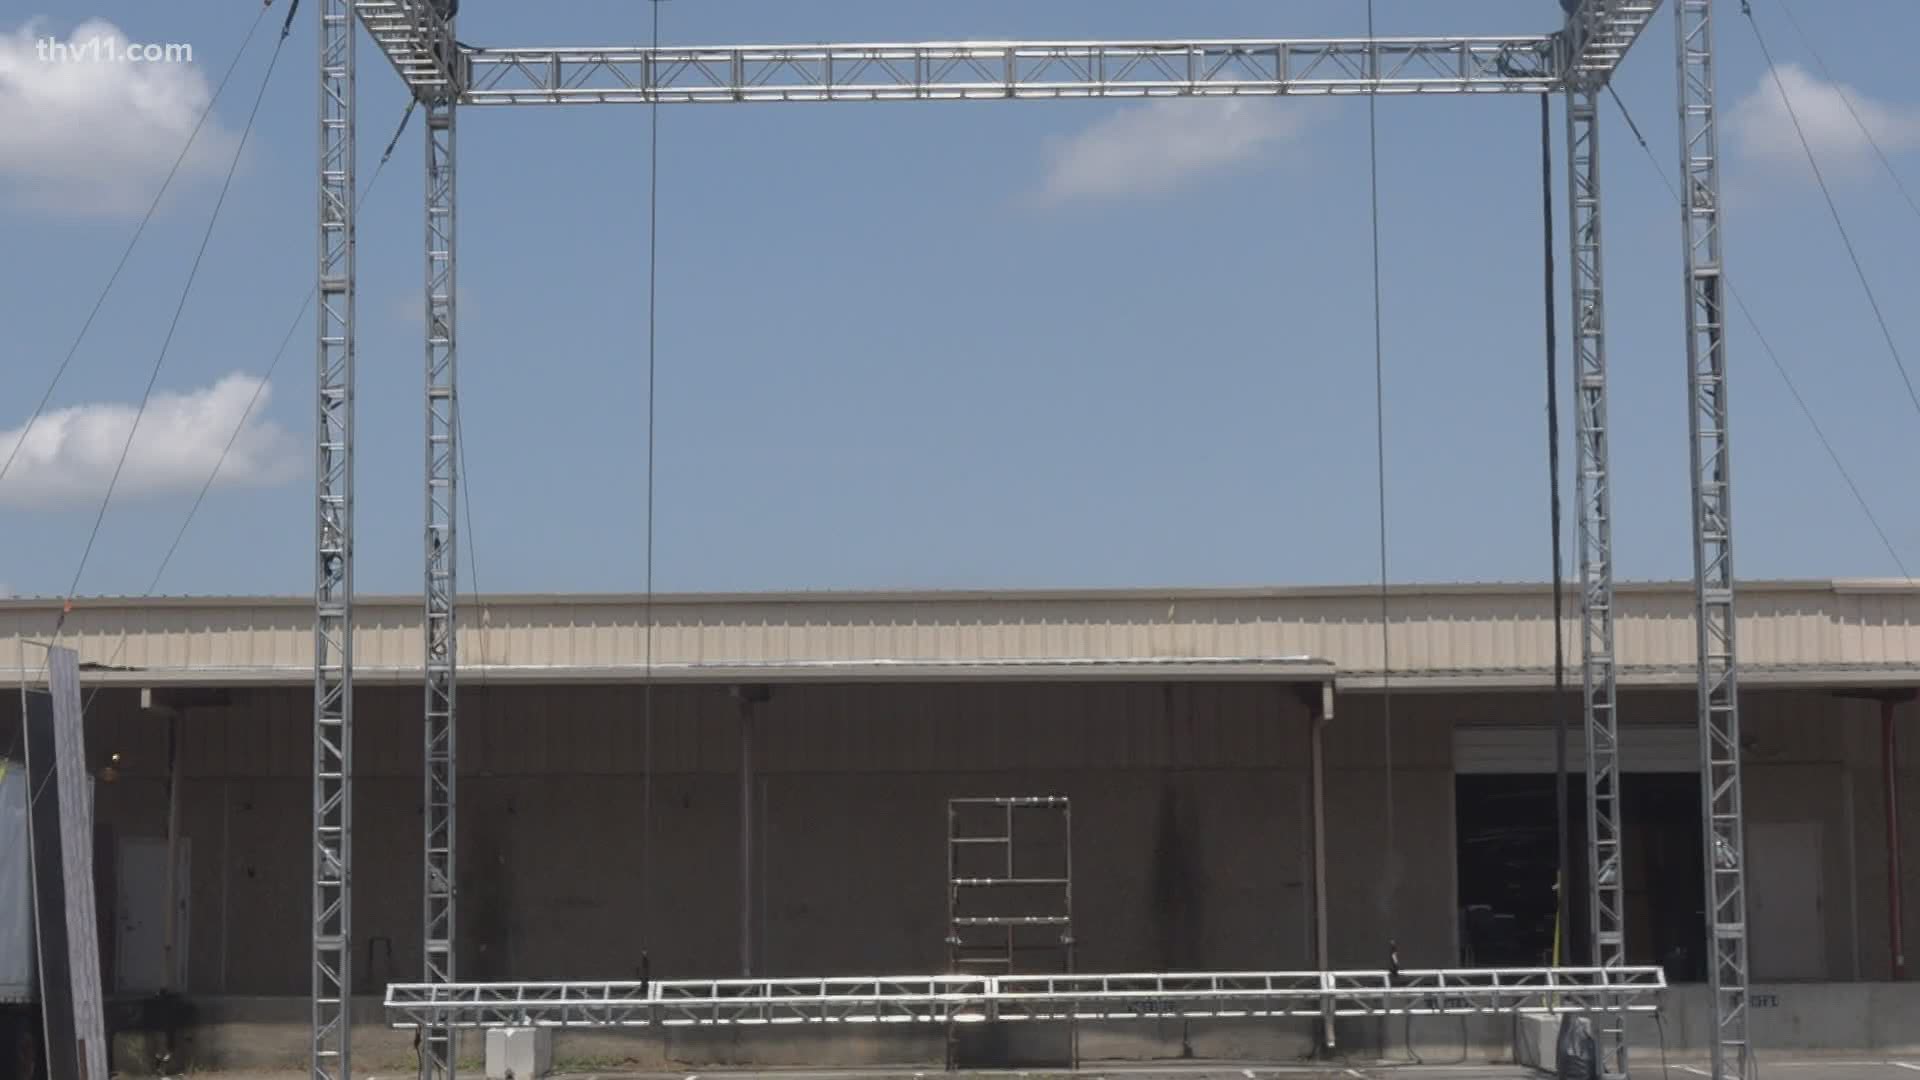 Drive-in theaters really feel like the safest way to see a movie right now. A small business in Little Rock is looking to bounce back thanks to a big screen.